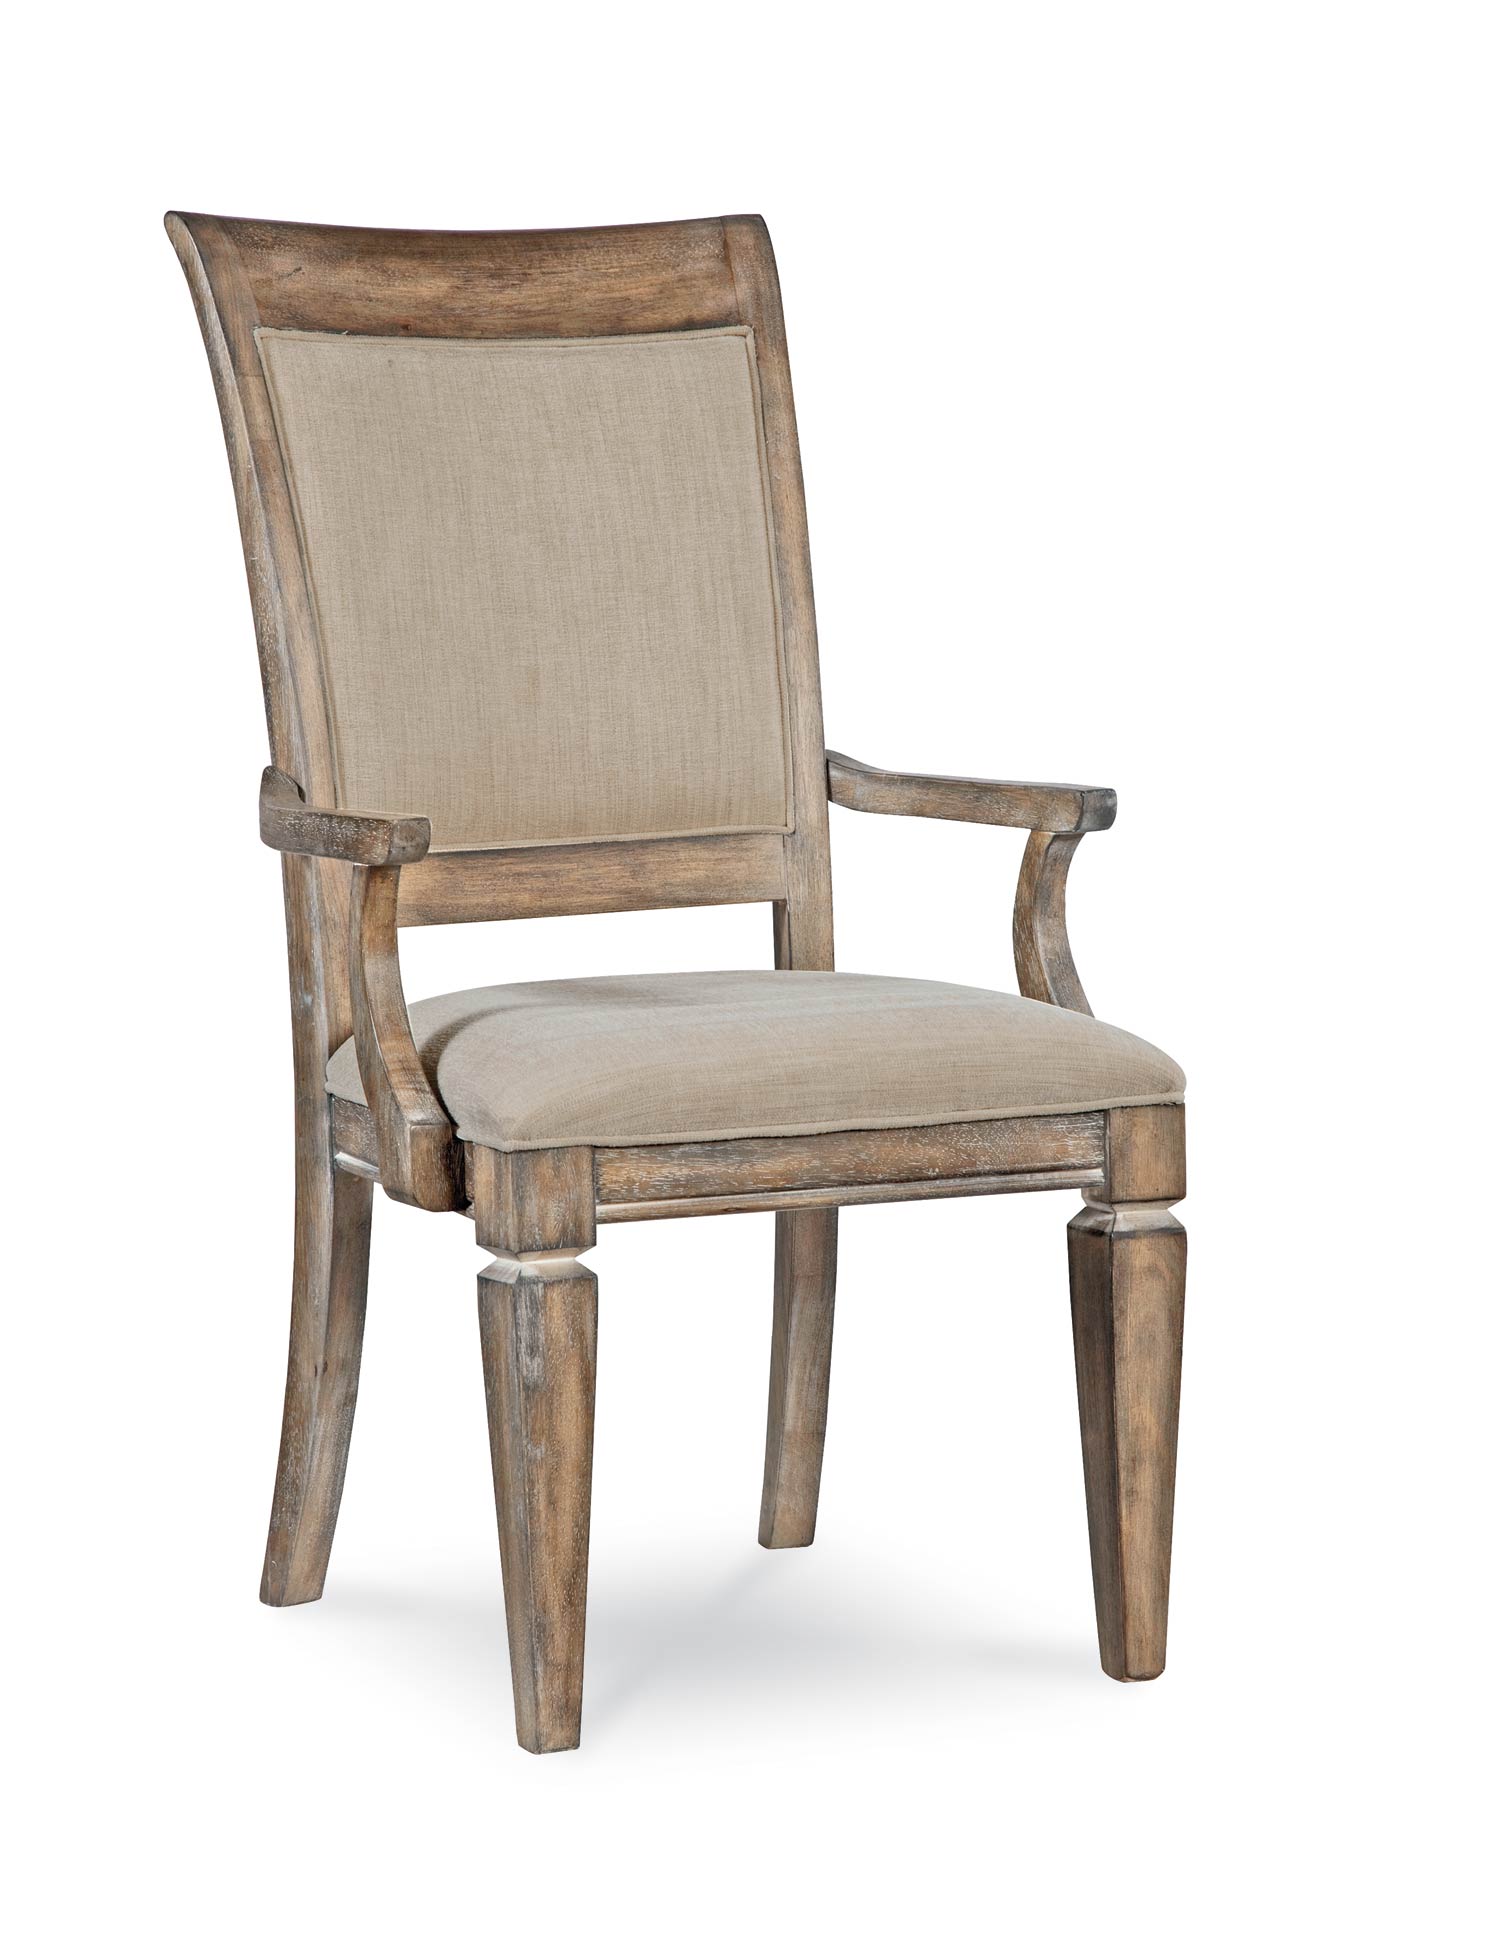 Legacy Classic Brownstone Village Upholstered Back Arm Chair - Aged Patina